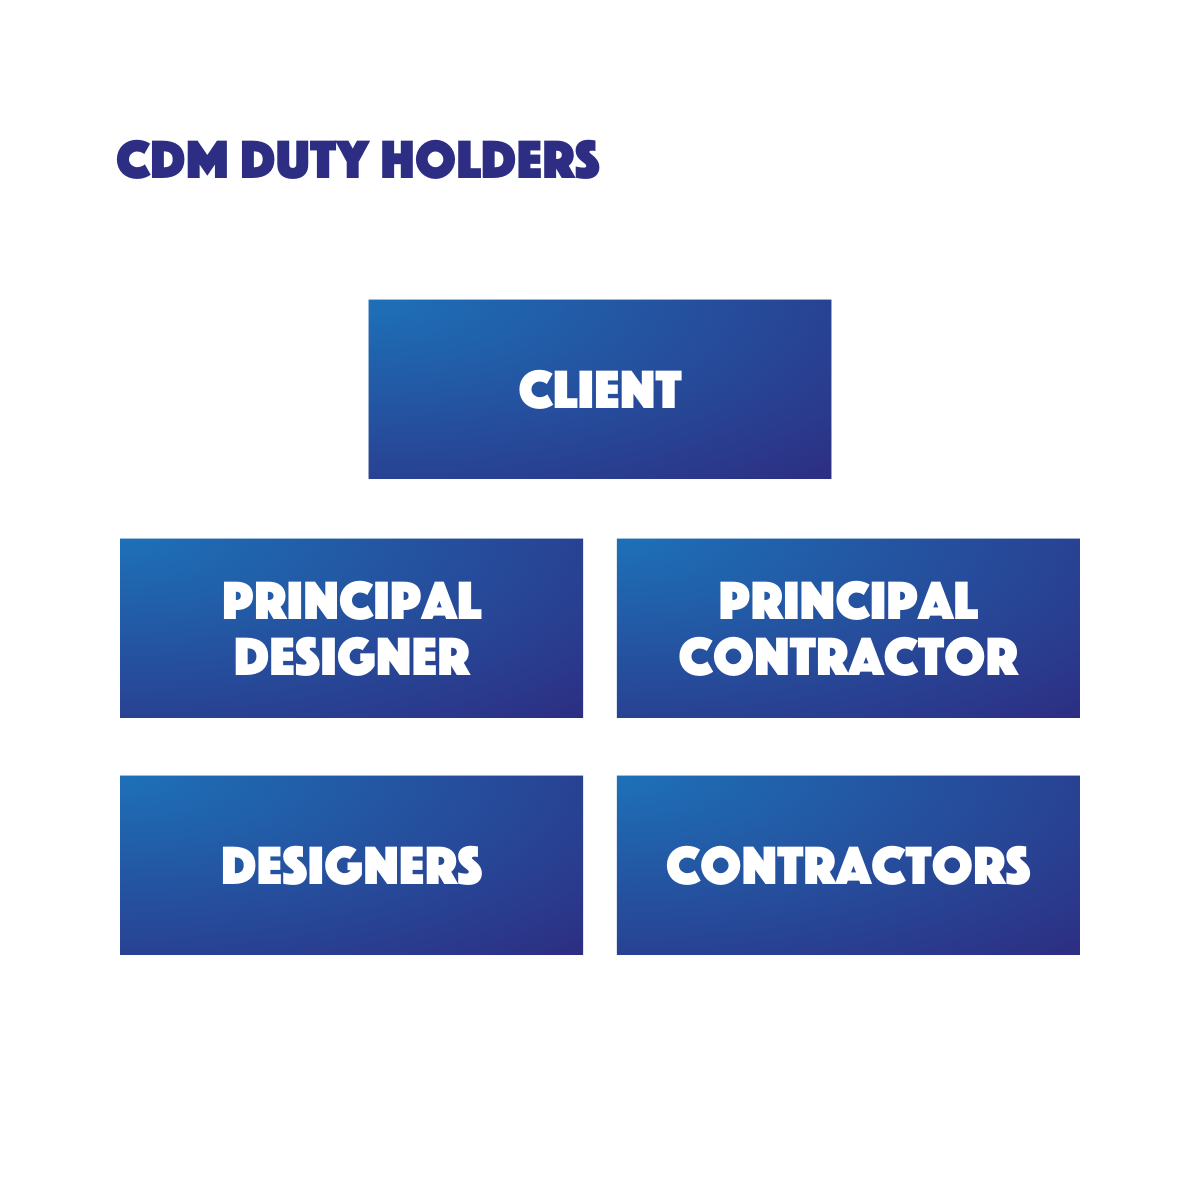 Organizational chart of CDM duty holders, including clients and principal designers, emphasizing the structured approach to CDM roles and responsibilities